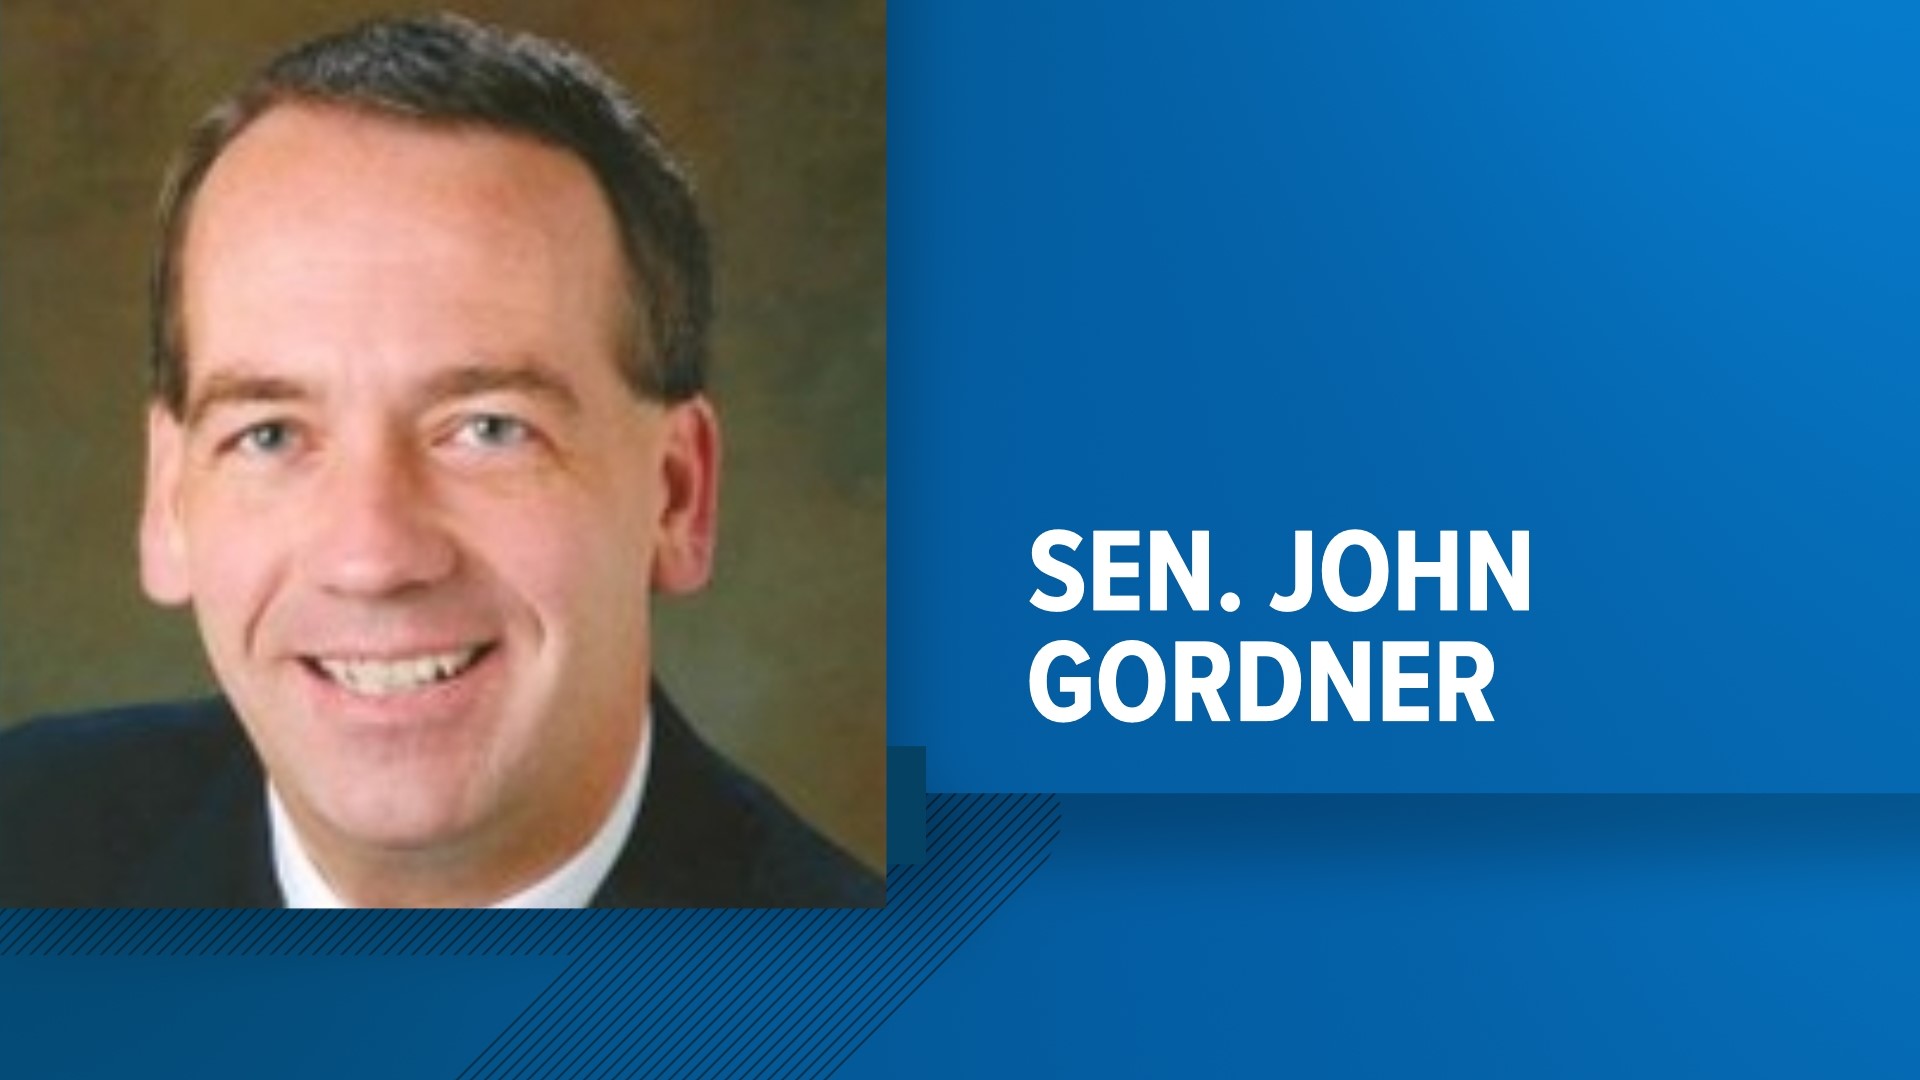 After 30 years, State Senator John Gordner announced Monday he is resigning effective Wednesday.